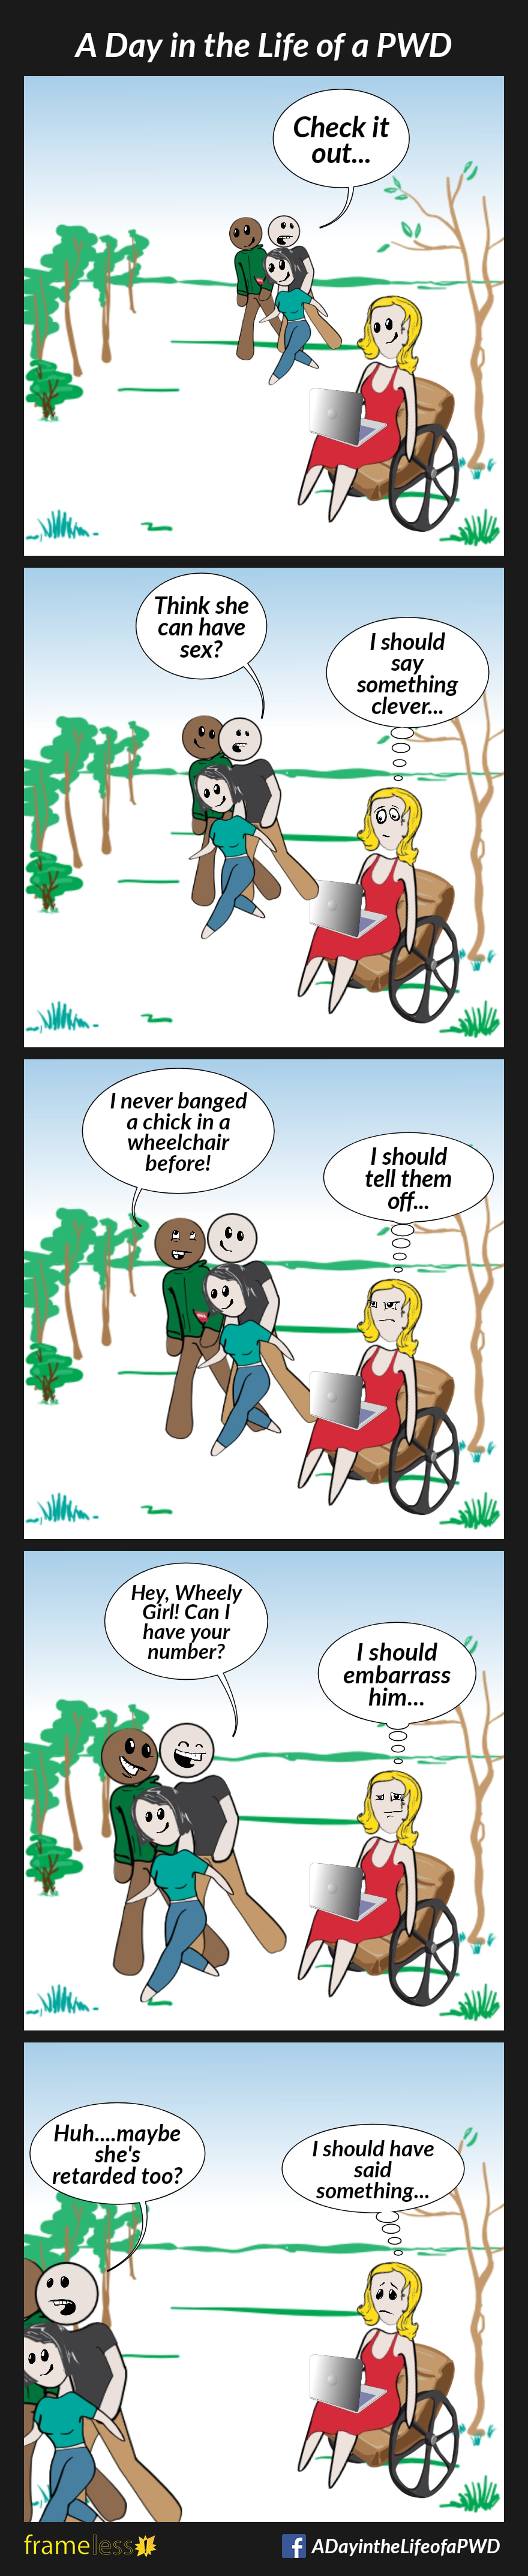 COMIC STRIP 
A Day in the Life of a PWD (Person With a Disability) 

Frame 1:
A woman in a wheelchair is sitting in a park, working on her laptop.
A man and his two friends are walking together through the park.
As they pass by the woman in the wheelchair, the man notices her.
MAN (to his friends): Check it out...

Frame 2:
MAN: Think she can have sex?
WOMAN (thinking to herself): I should say something clever...

Frame 3:
FRIEND: I've never banged a chick in a wheelchair before!
WOMAN (thinking): I should tell them off...

Frame 4:
MAN (to woman): Hey, Wheely Girl! Can I have your number?
WOMAN (thinking): I should embarrass him...

Frame 5:
The group pass the woman and continue on.
MAN: Huh...maybe she's retarded, too?
WOMAN (thinking): I should have said something...